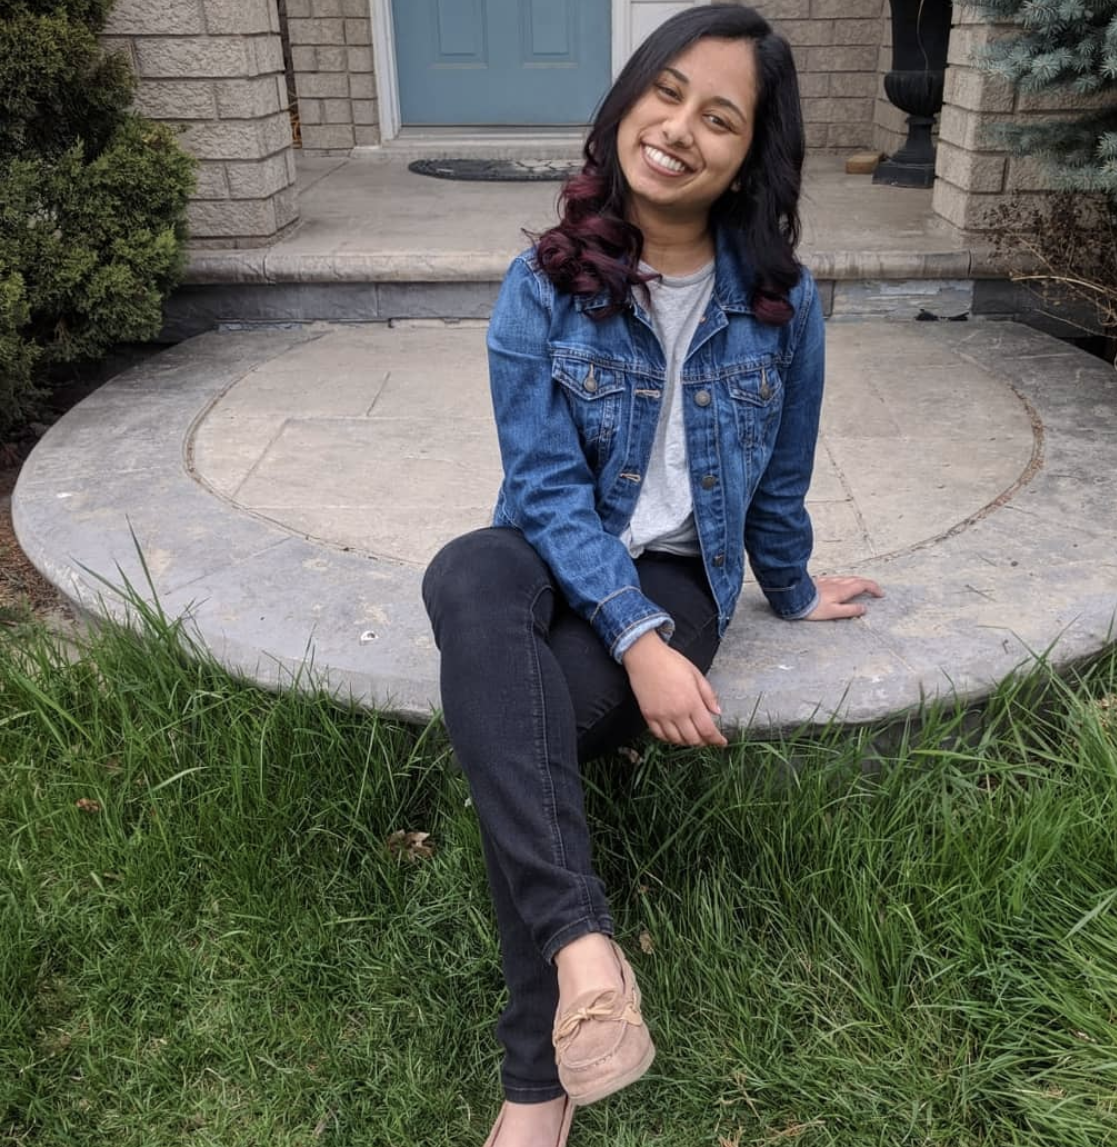 Third year Humber College Bachelor of Paralegal Studies student Judy Jaison sits outside and smiles while wearing a jean jacket.